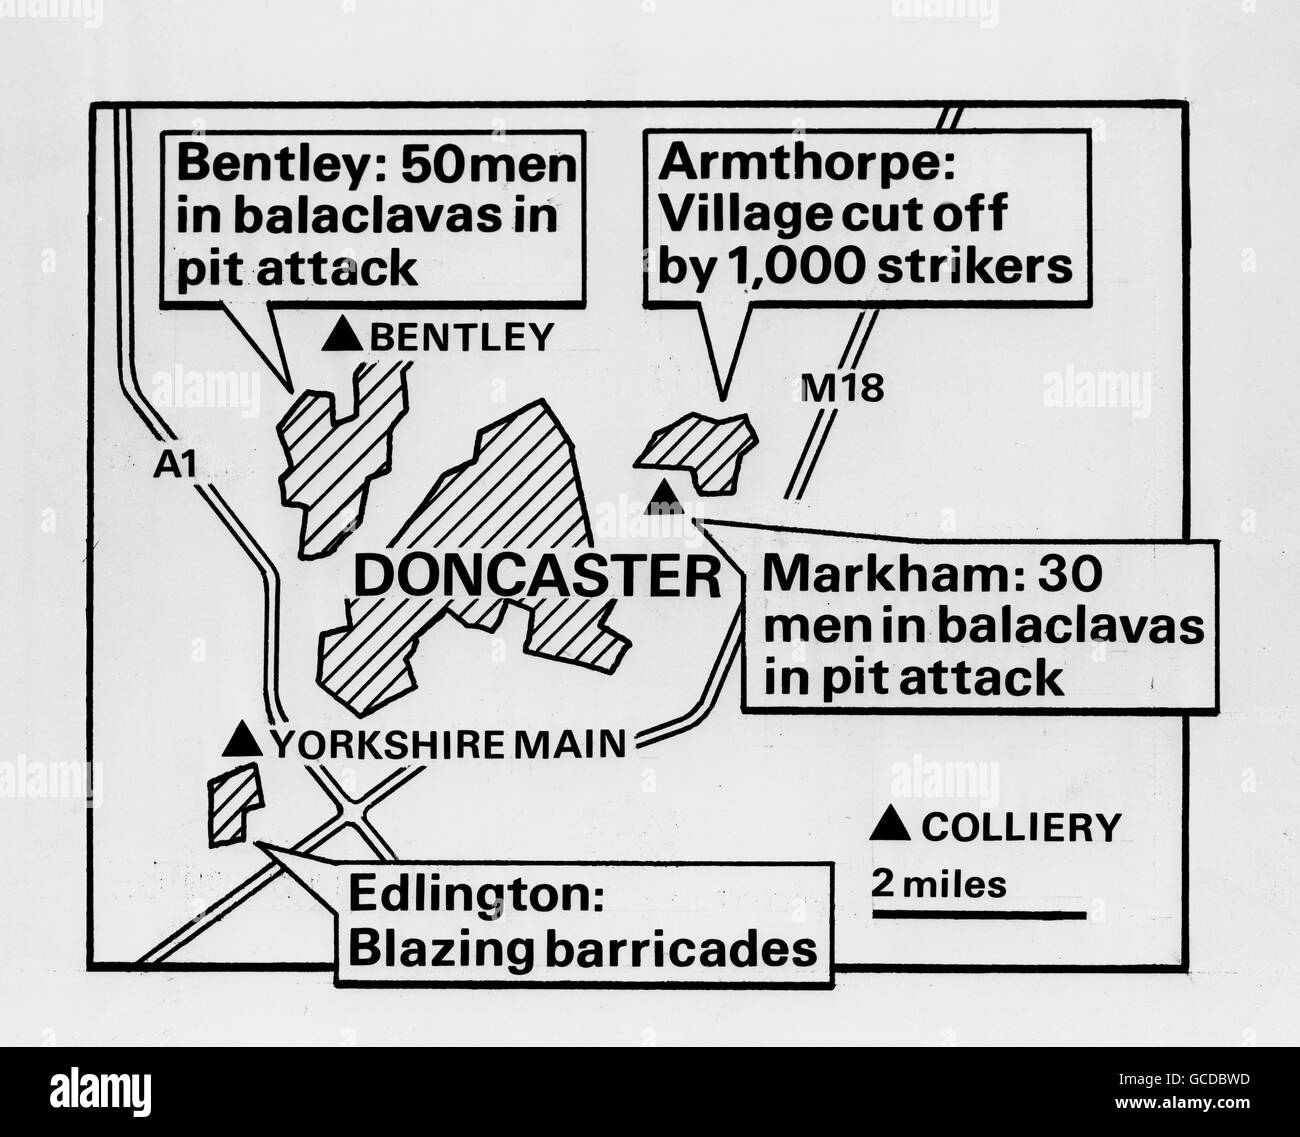 A Press Association graphic showing the miners strike in the Doncaster area. At Bentley, 50 men in balaclavas smashed equipment at the colliery, Armthorpe was cut off by 1,000 strikers, at Markham Main Colliery 30 men in balaclavas smashed equipment and Edlington had blazing barricades. Stock Photo